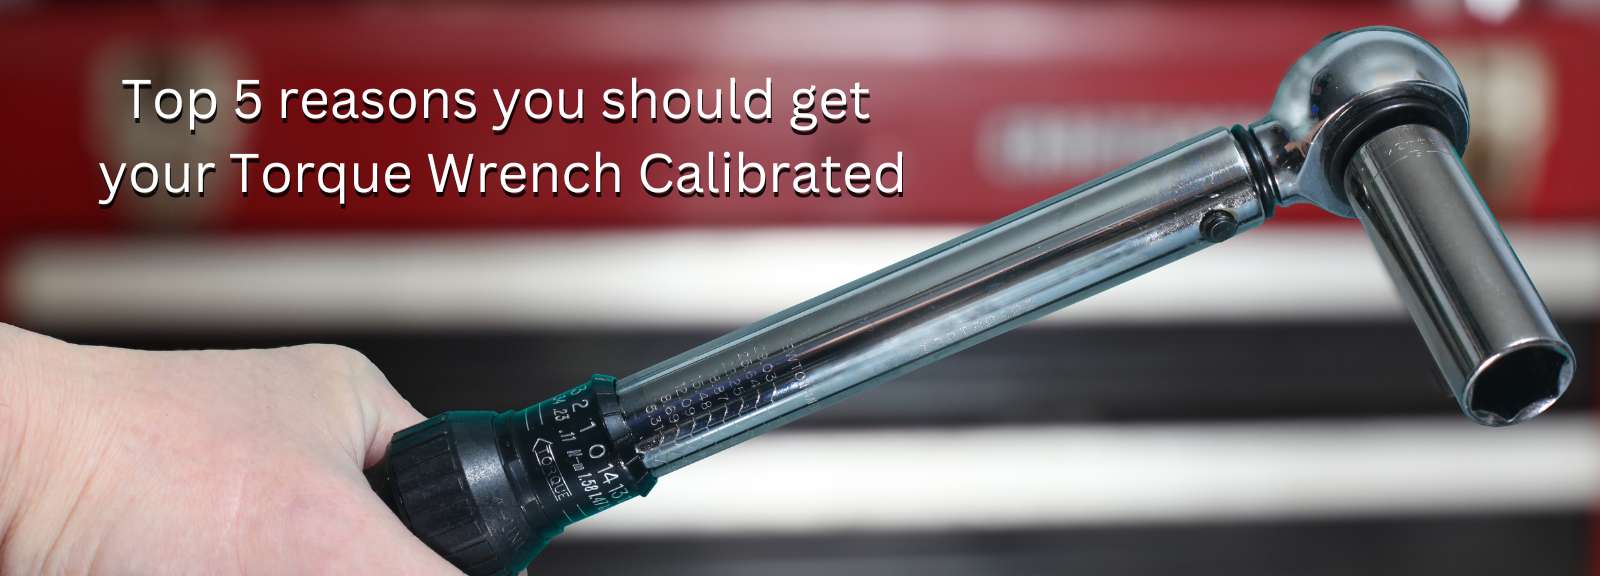 Top 5 reasons you should get your Torque Wrench Calibrated